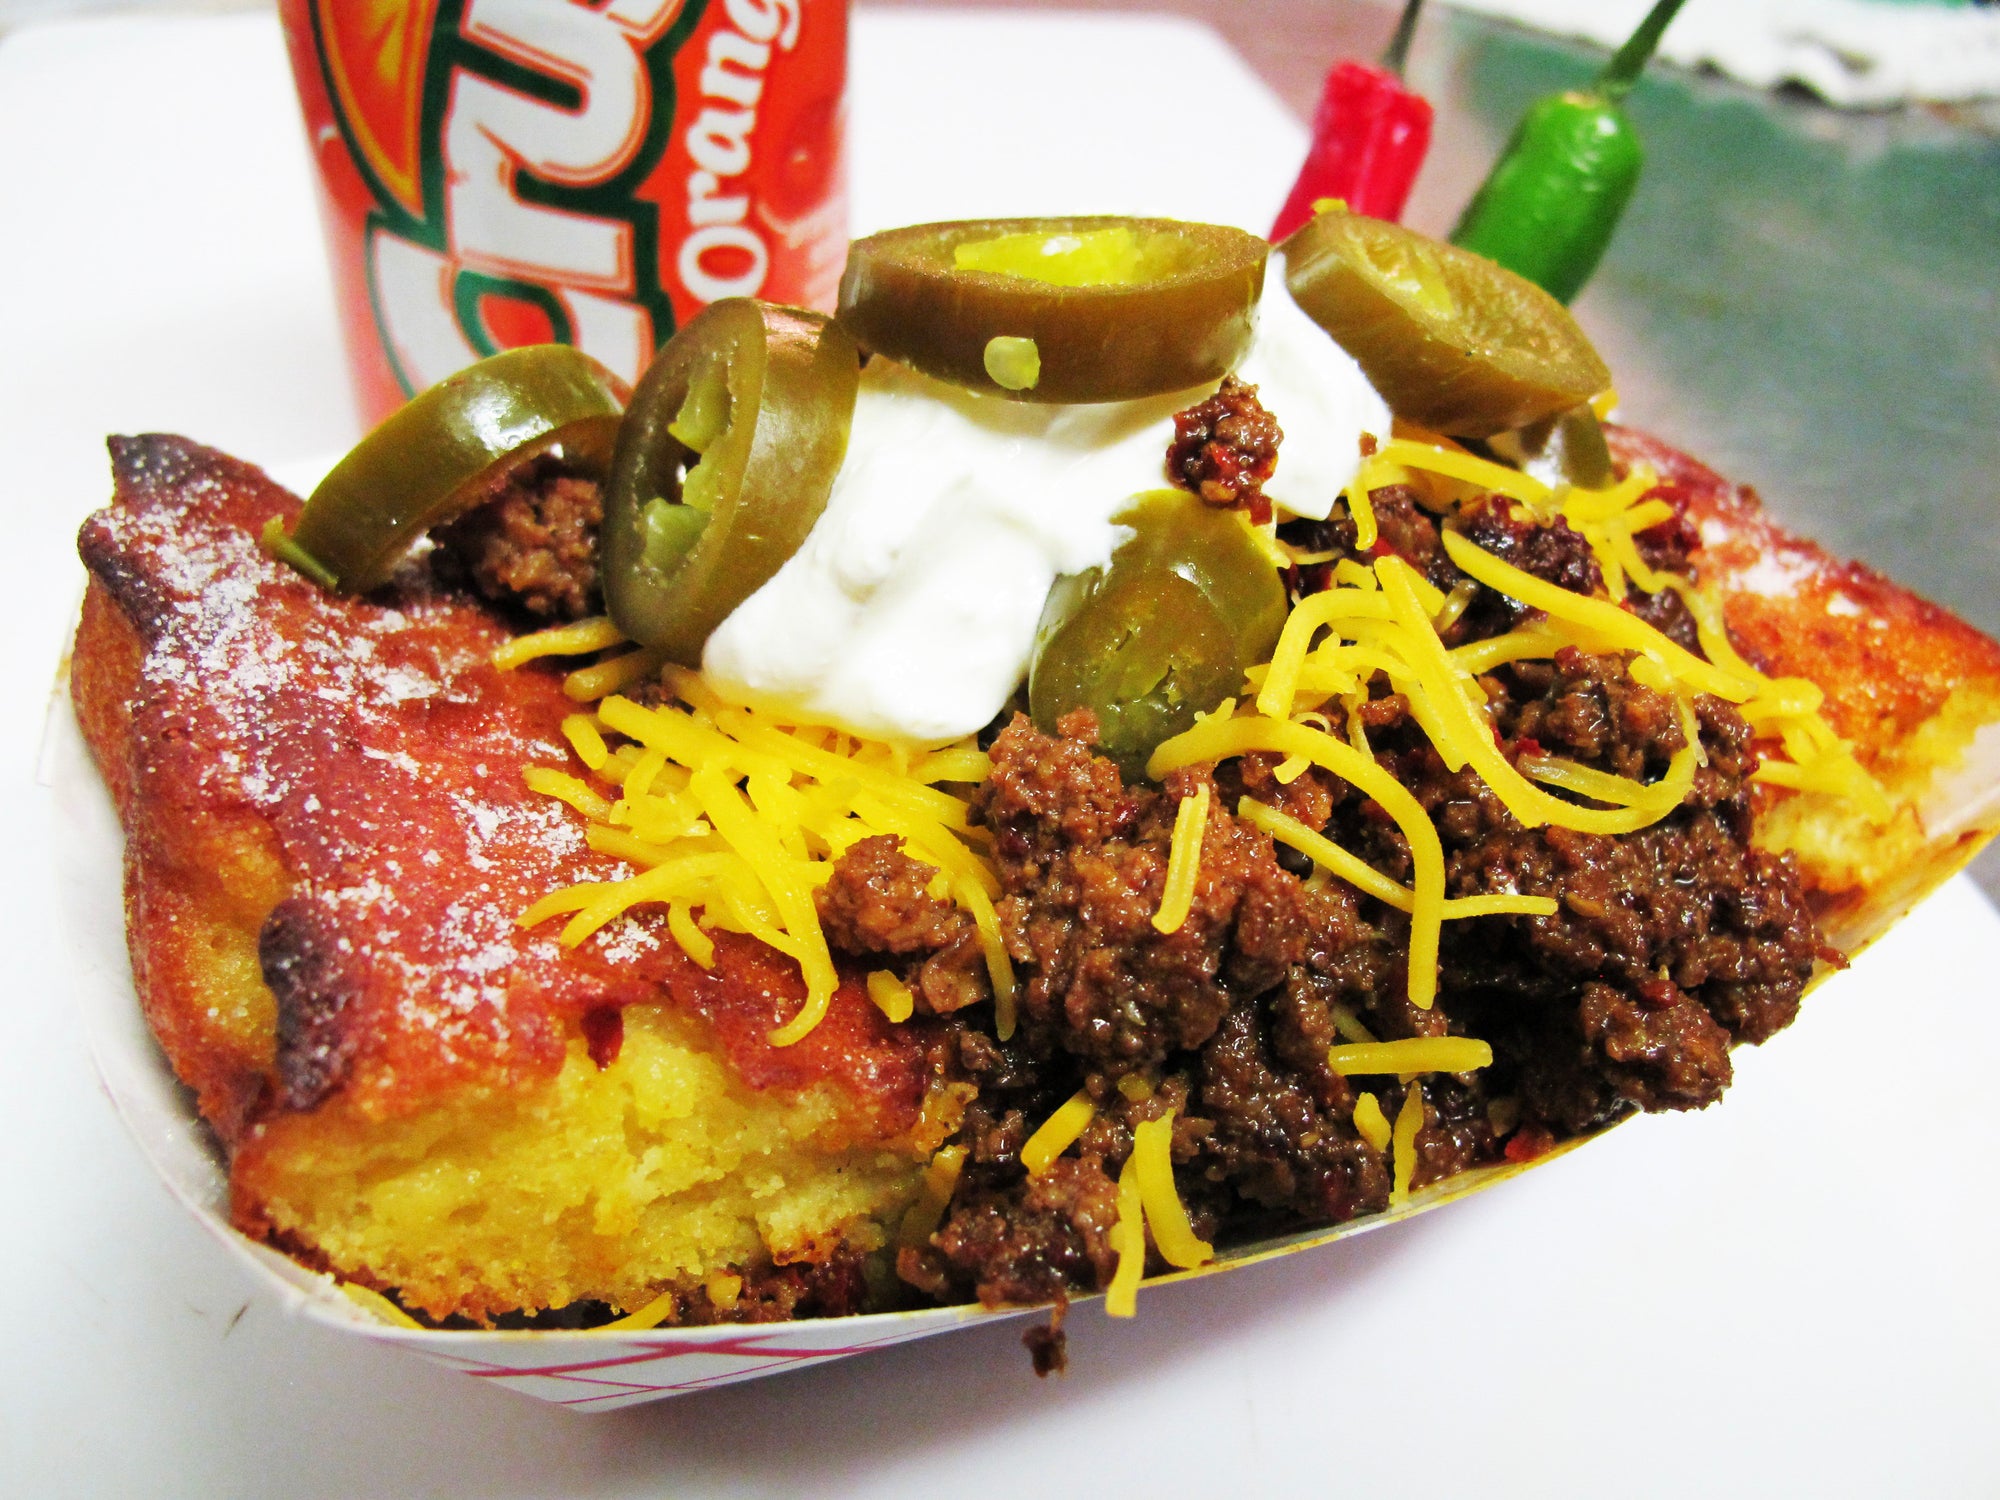 Chamoy City Limits giving away free Frito pies to celebrate Travel Channel filming